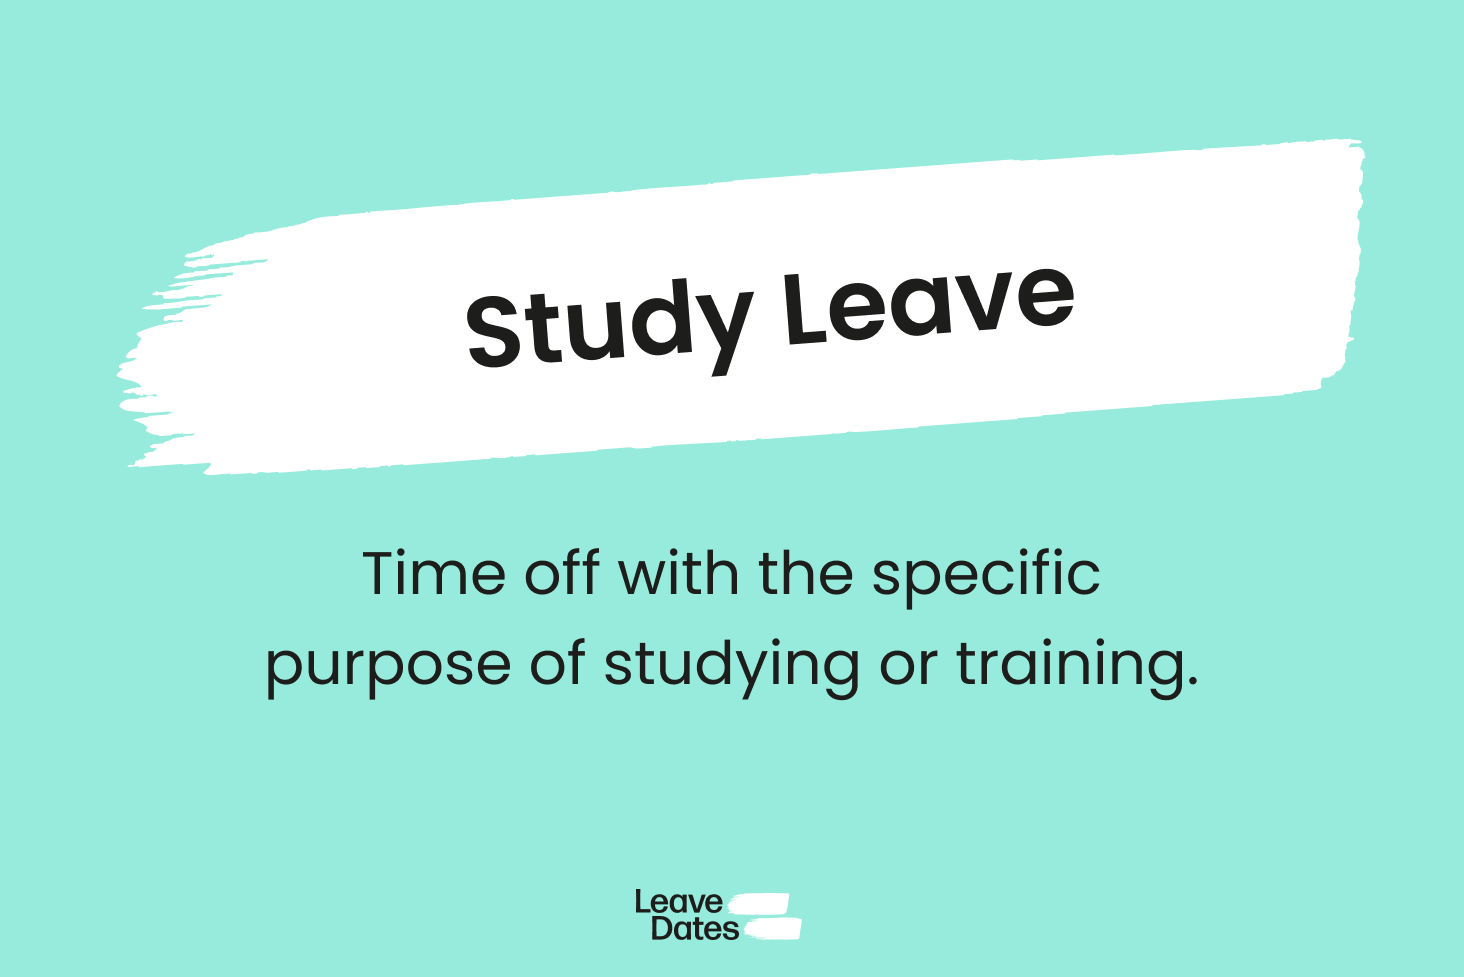 What is Study Leave